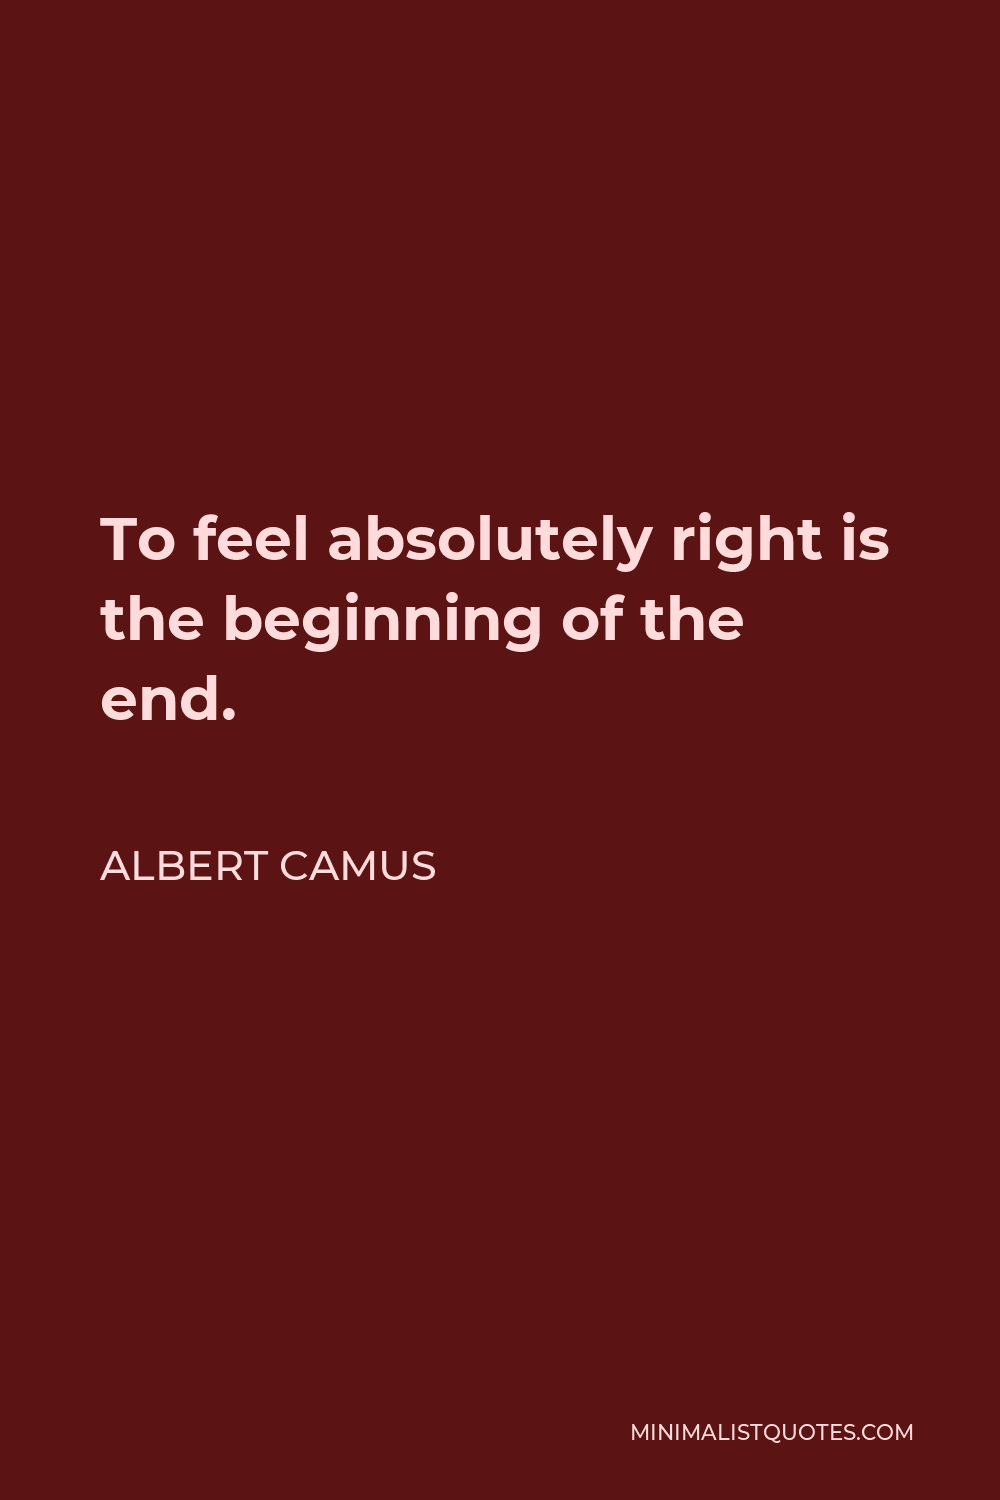 Albert Camus Quote - To feel absolutely right is the beginning of the end.